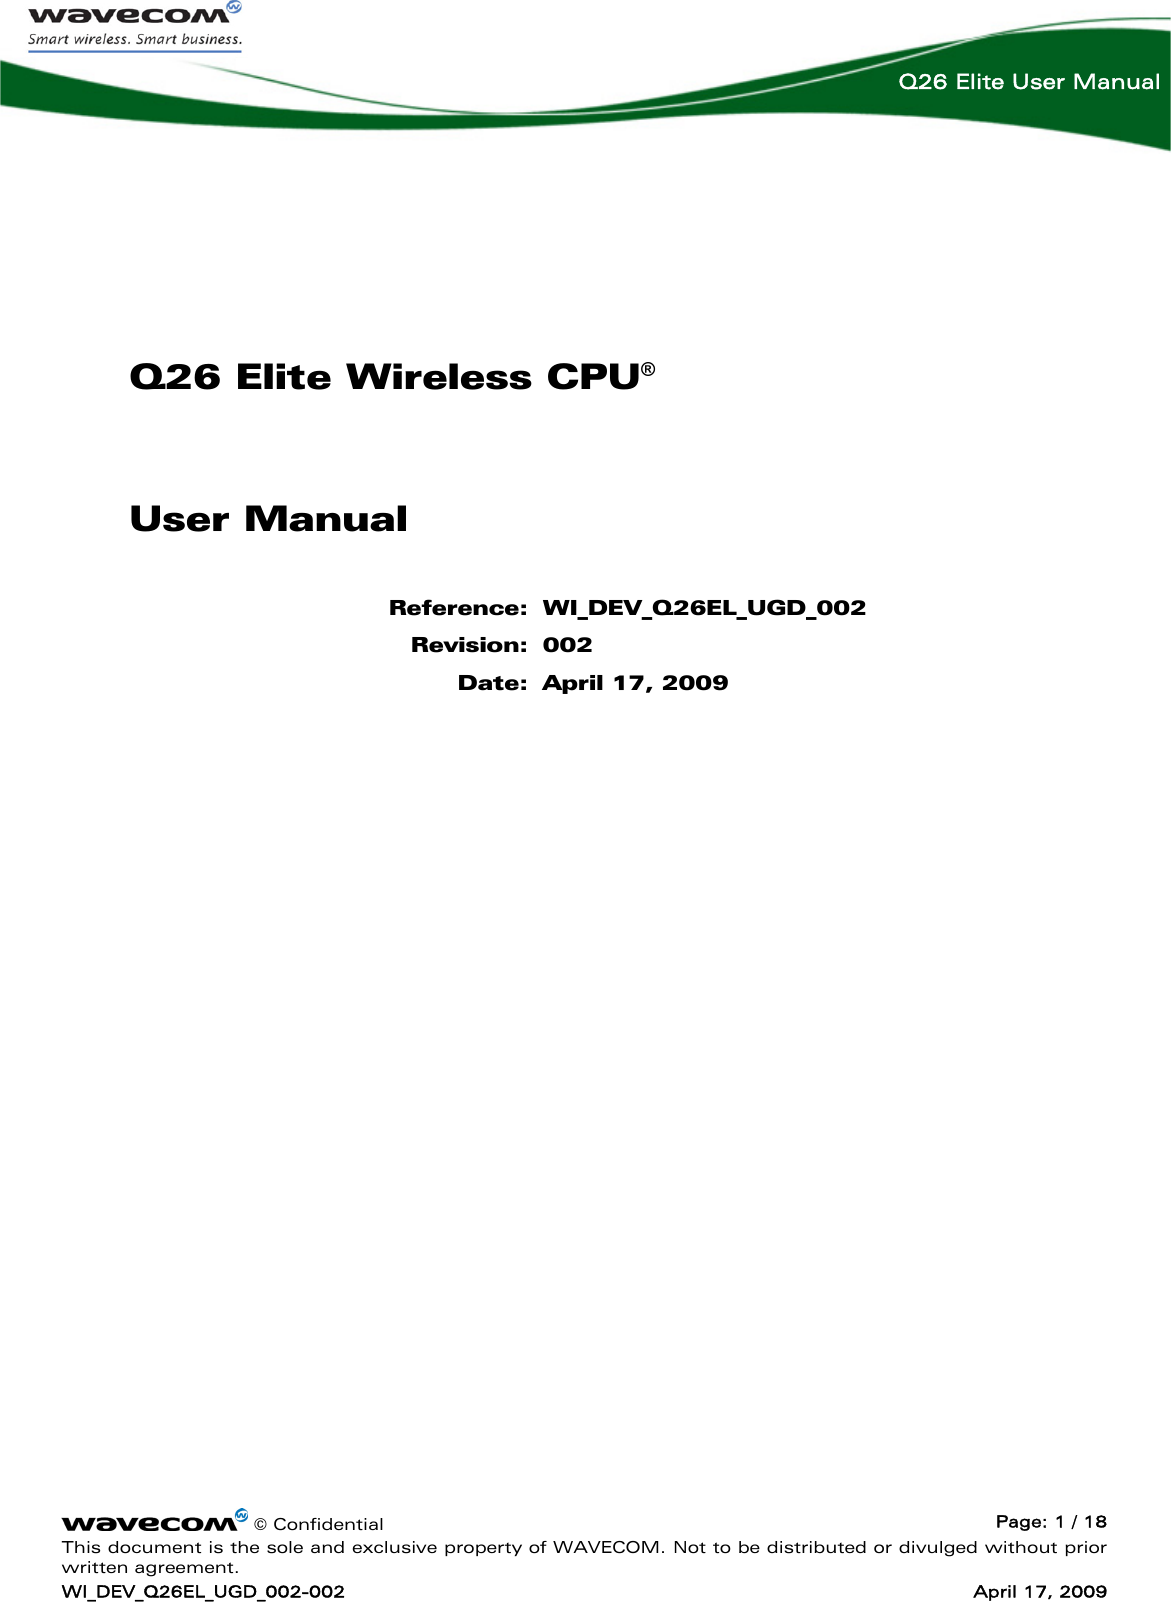     © Confidential  Page: 1 / 18 This document is the sole and exclusive property of WAVECOM. Not to be distributed or divulged without prior written agreement. WI_DEV_Q26EL_UGD_002-002  April 17, 2009  Q26 Elite User Manual Q26 Elite Wireless CPU®User Manual Reference: WI_DEV_Q26EL_UGD_002 Revision: 002 Date: April 17, 2009    